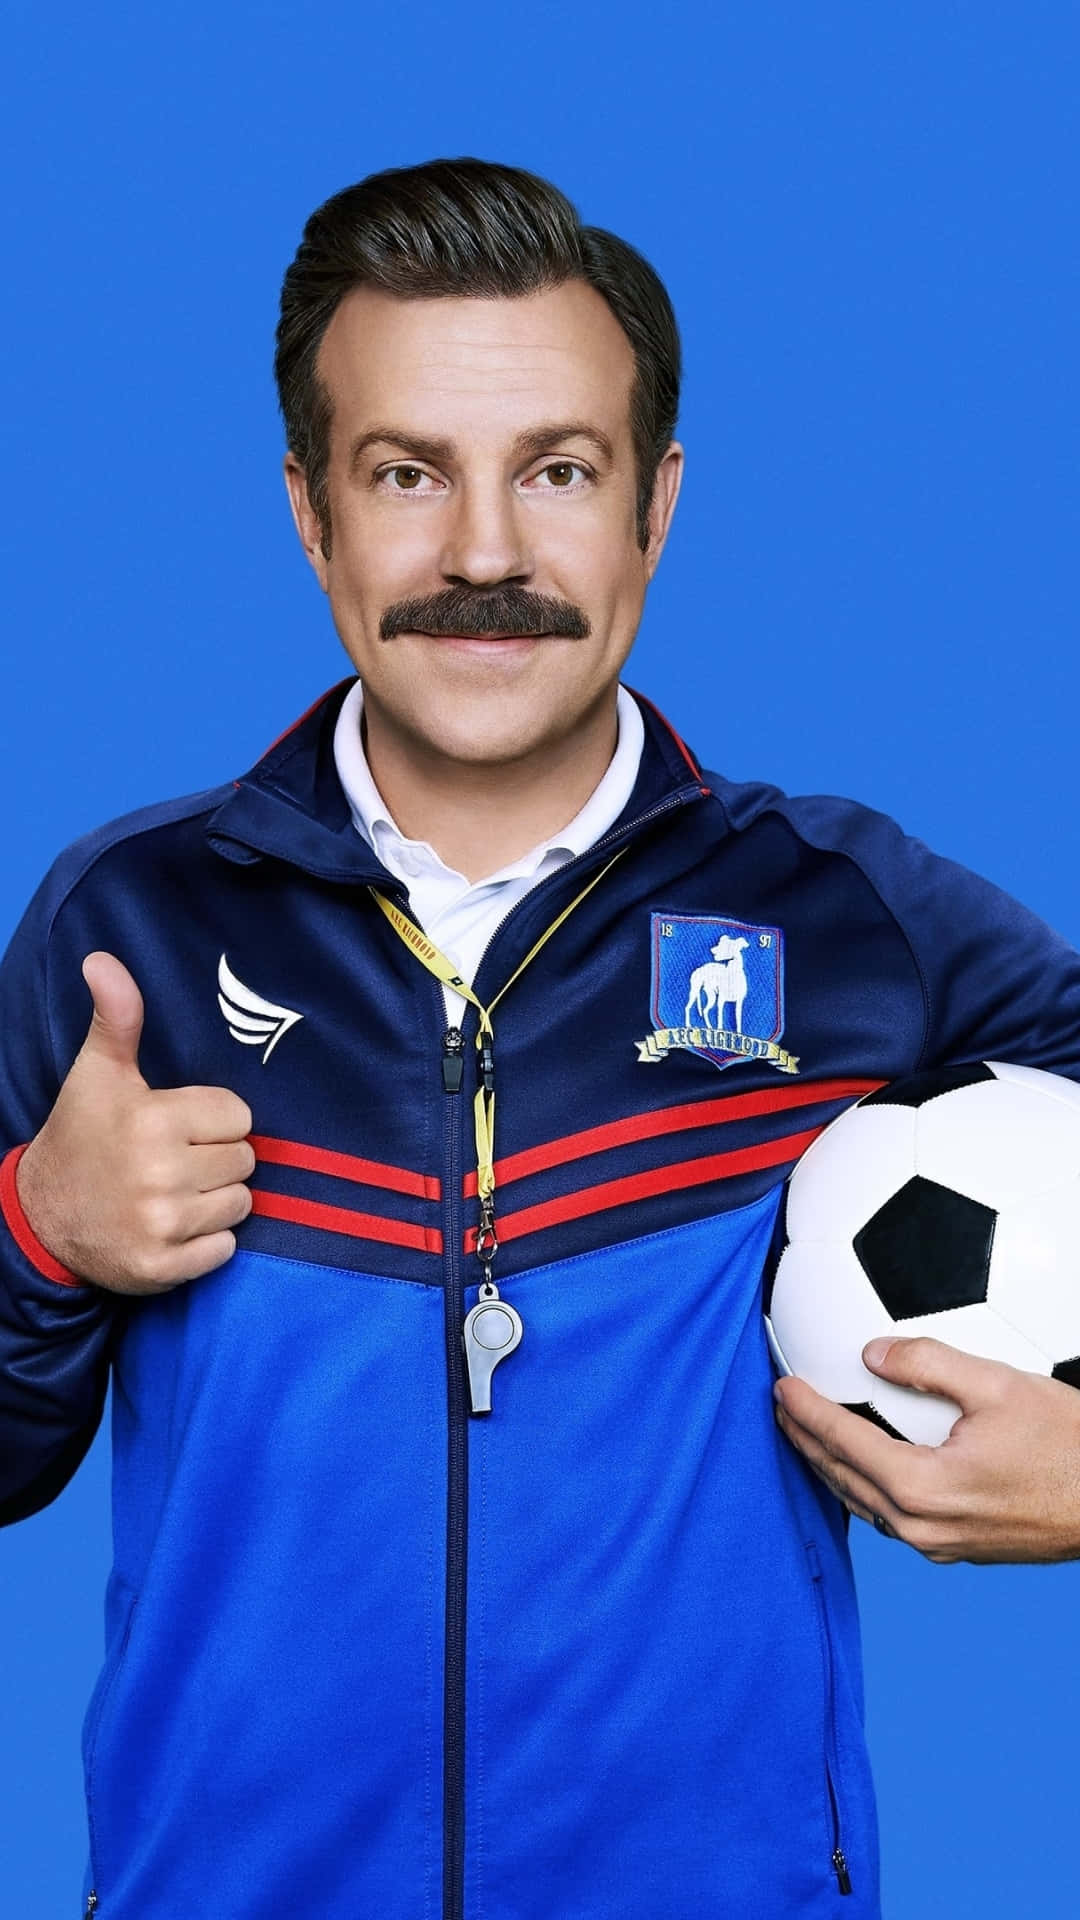 Ted Lasso Thumbs Up Soccer Coach Wallpaper